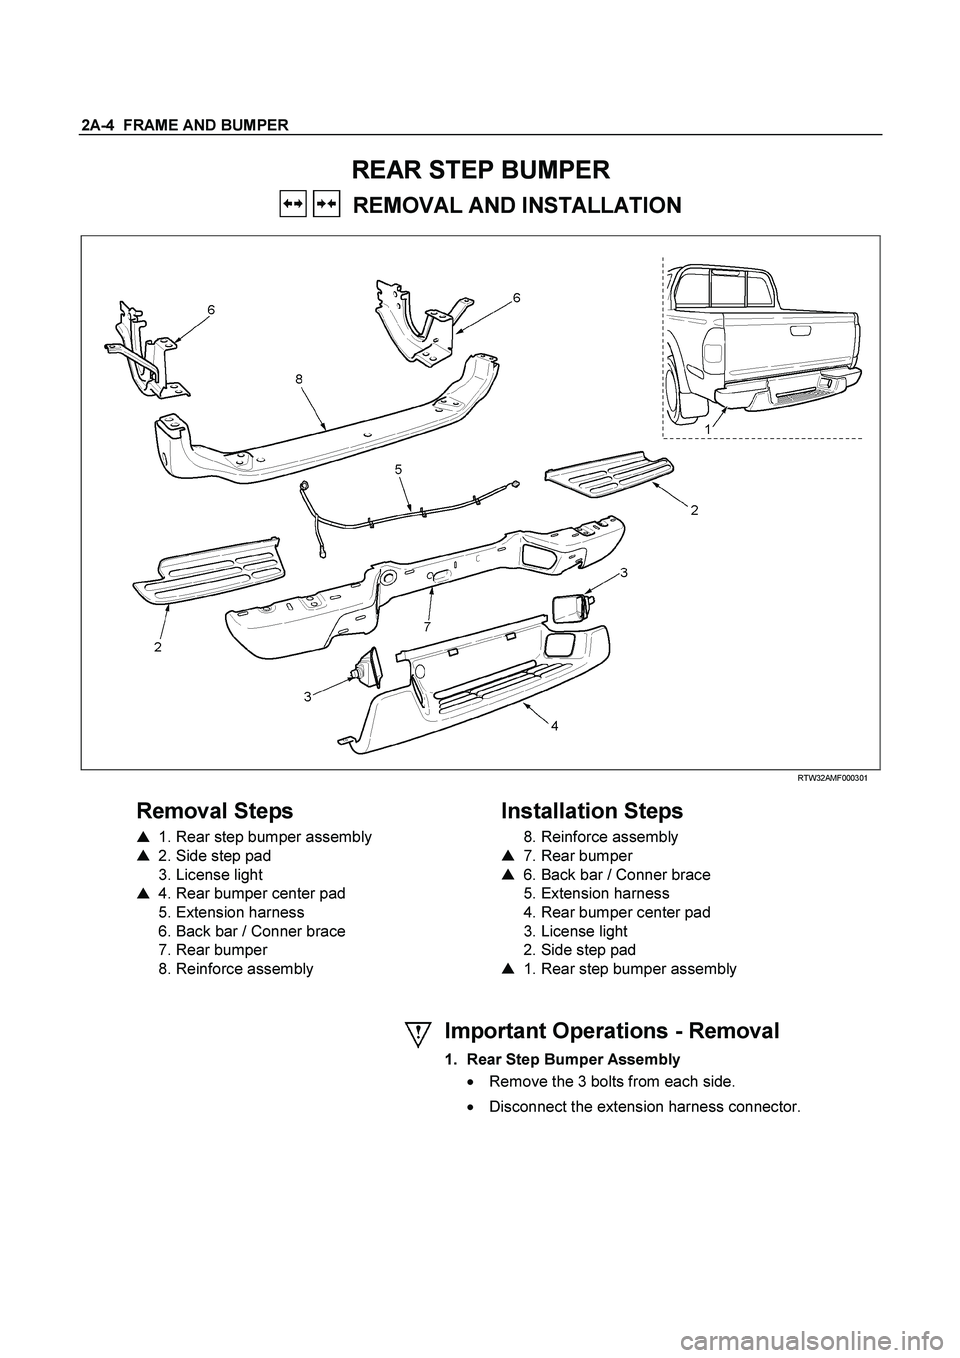 ISUZU TF SERIES 2004  Workshop Manual 2A-4  FRAME AND BUMPER 
REAR STEP BUMPER 
   REMOVAL AND INSTALLATION 
 RTW32AMF000301 
 
Removal Steps   
   
1. Rear step bumper assembly    
    
2. Side step pad    
   3. License light  
    
